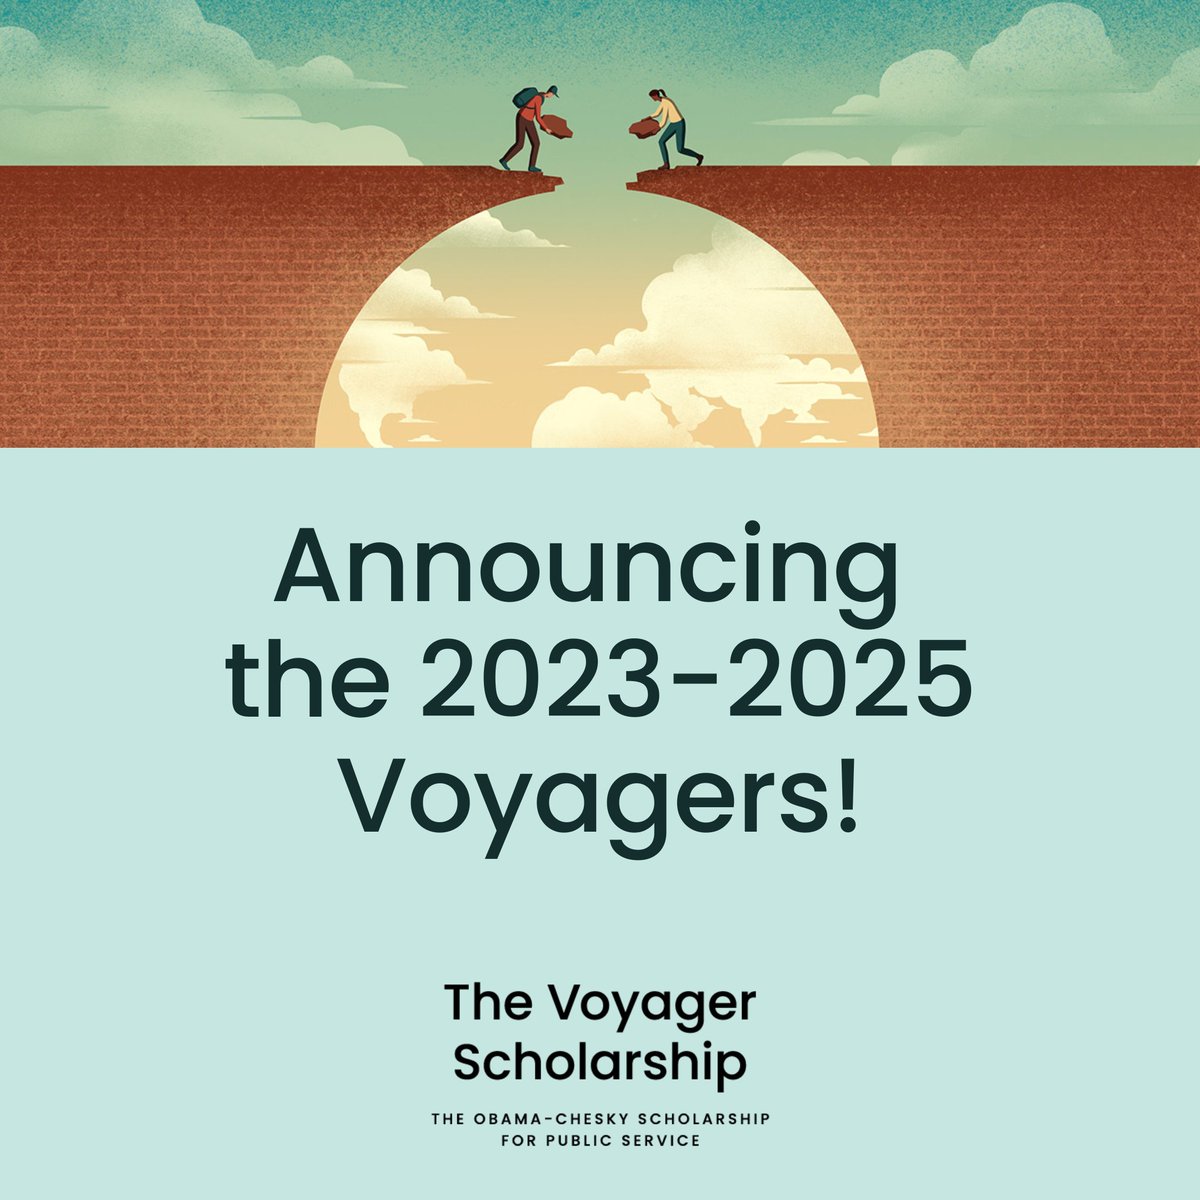 Through the Voyager Scholarship, Michelle, @BChesky, and I are supporting the next generation of leaders pursuing careers in public service. We're excited to welcome our newest class of Voyagers, and can’t wait to work with them over the next few years. obama.org/programs/voyag…